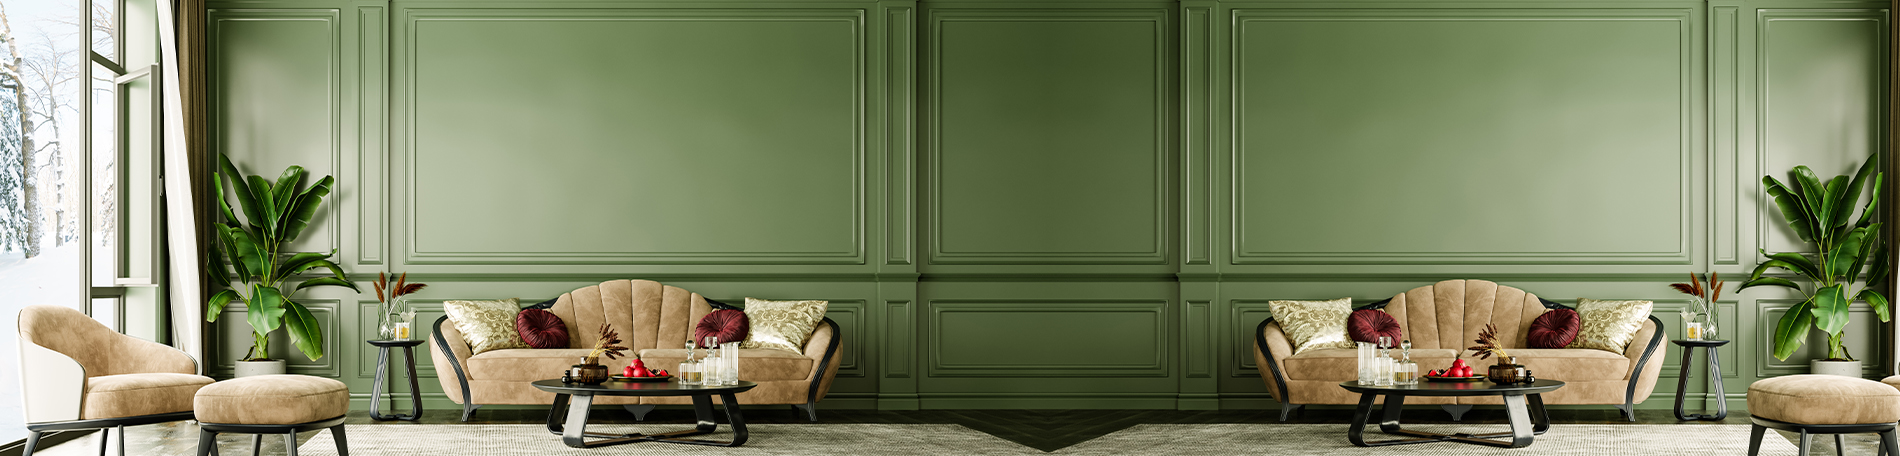 Classic Sofa With Green Wall Background